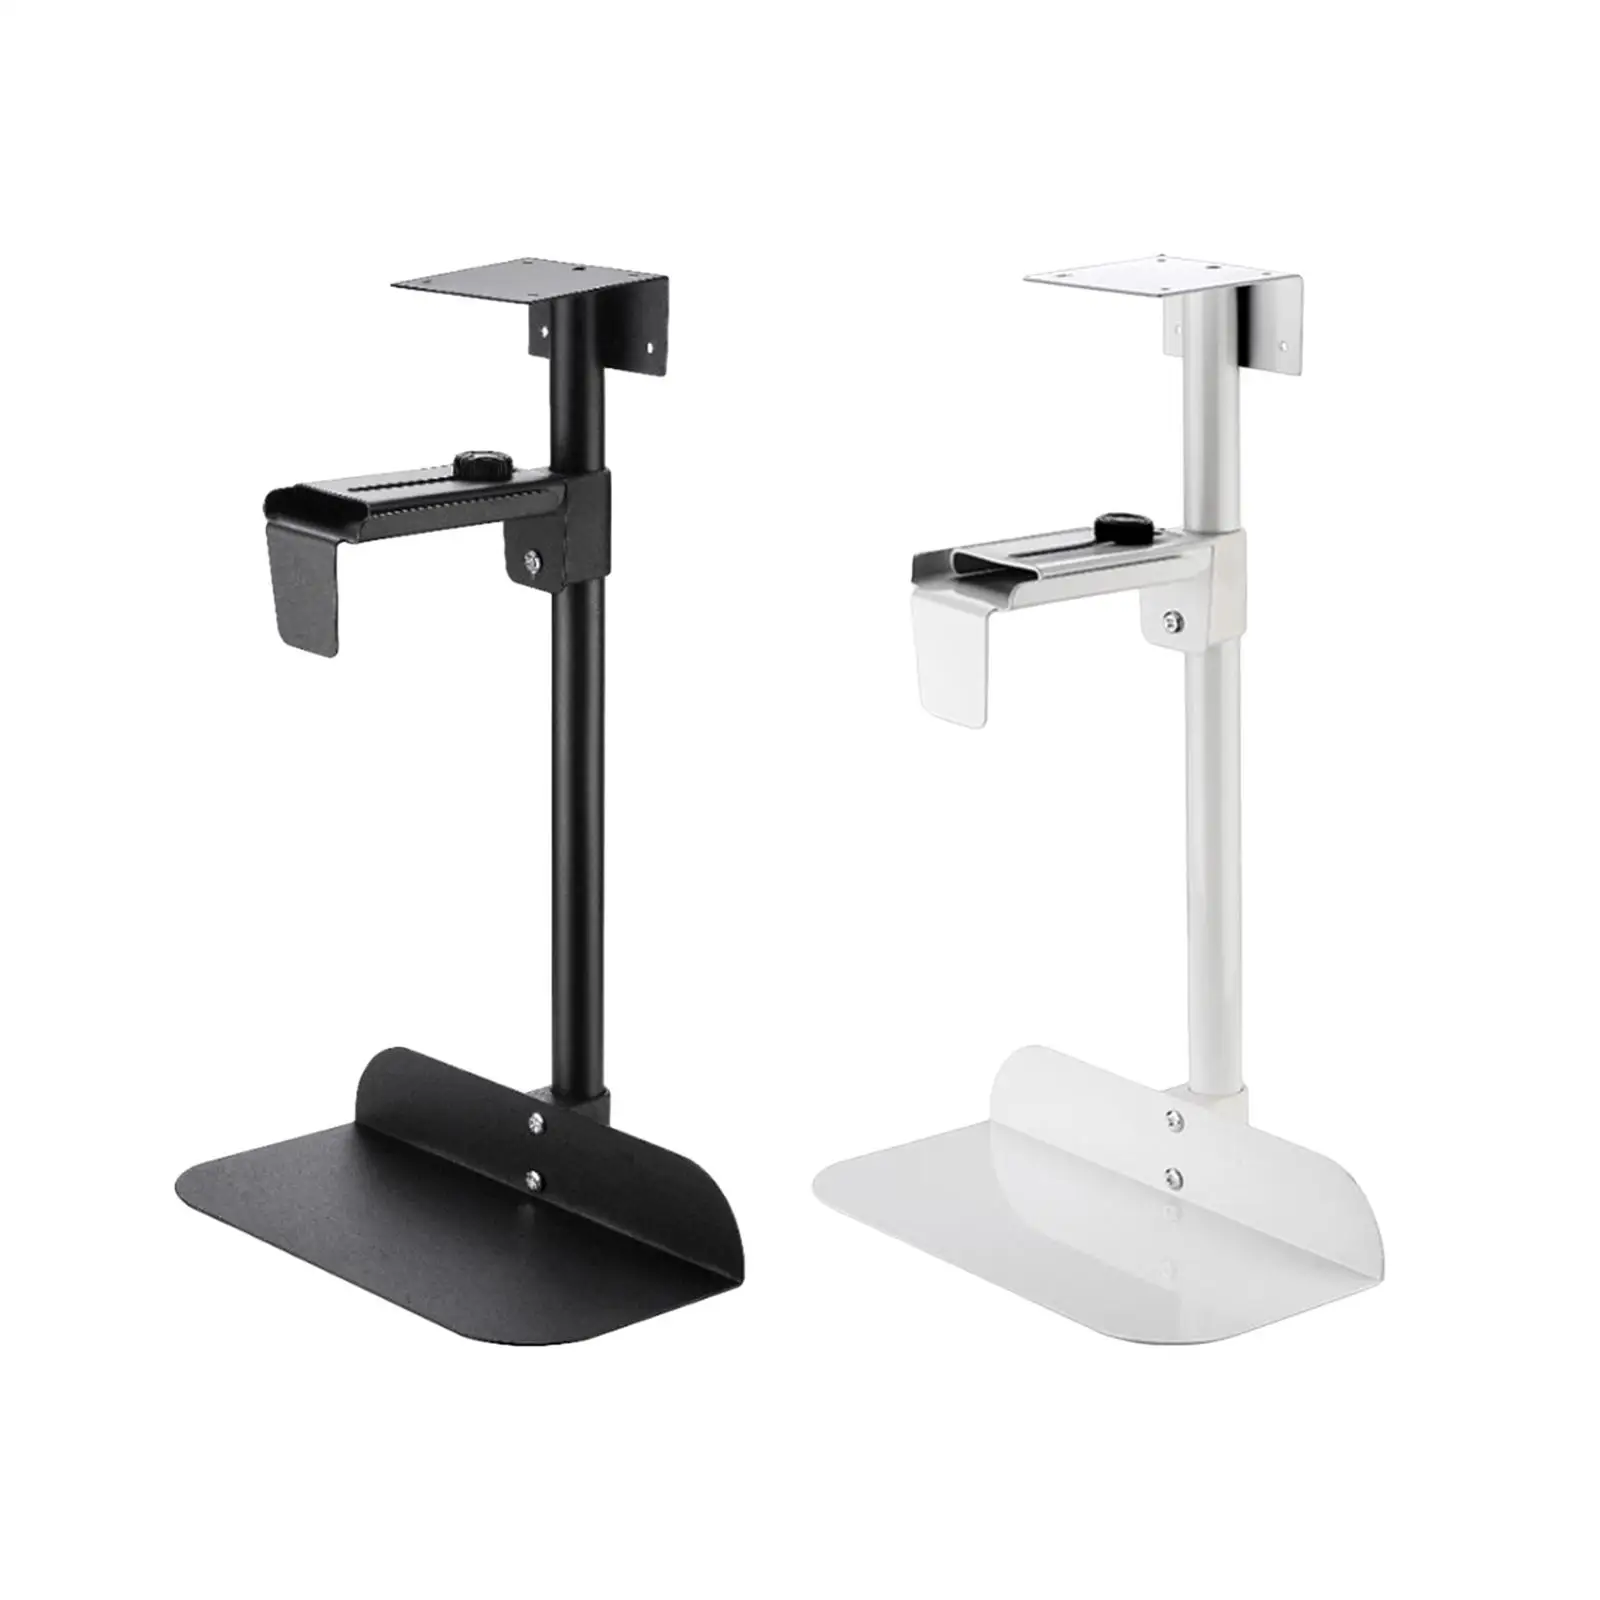 

under Desk PC Mount Computer Holder 360 Degree Rotatable under Desk Computer Stand for Home Office Desktop Computer Towers